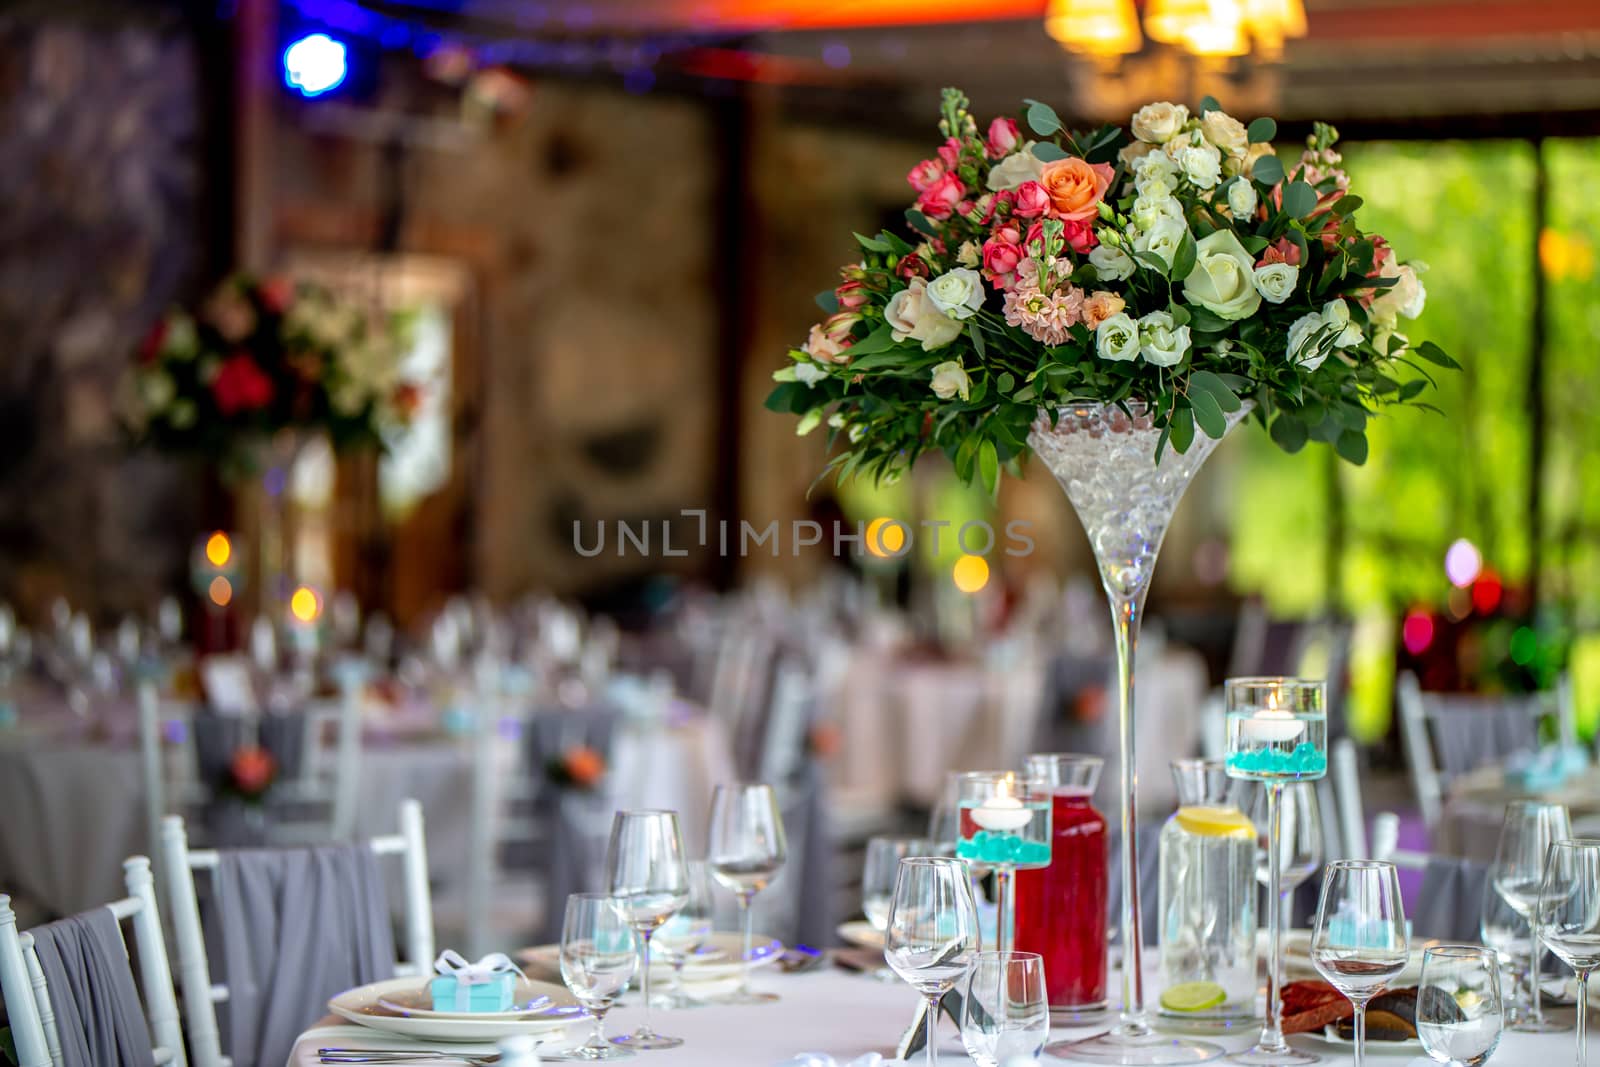 Wedding table decorated with flowers and dishes by fotorobs